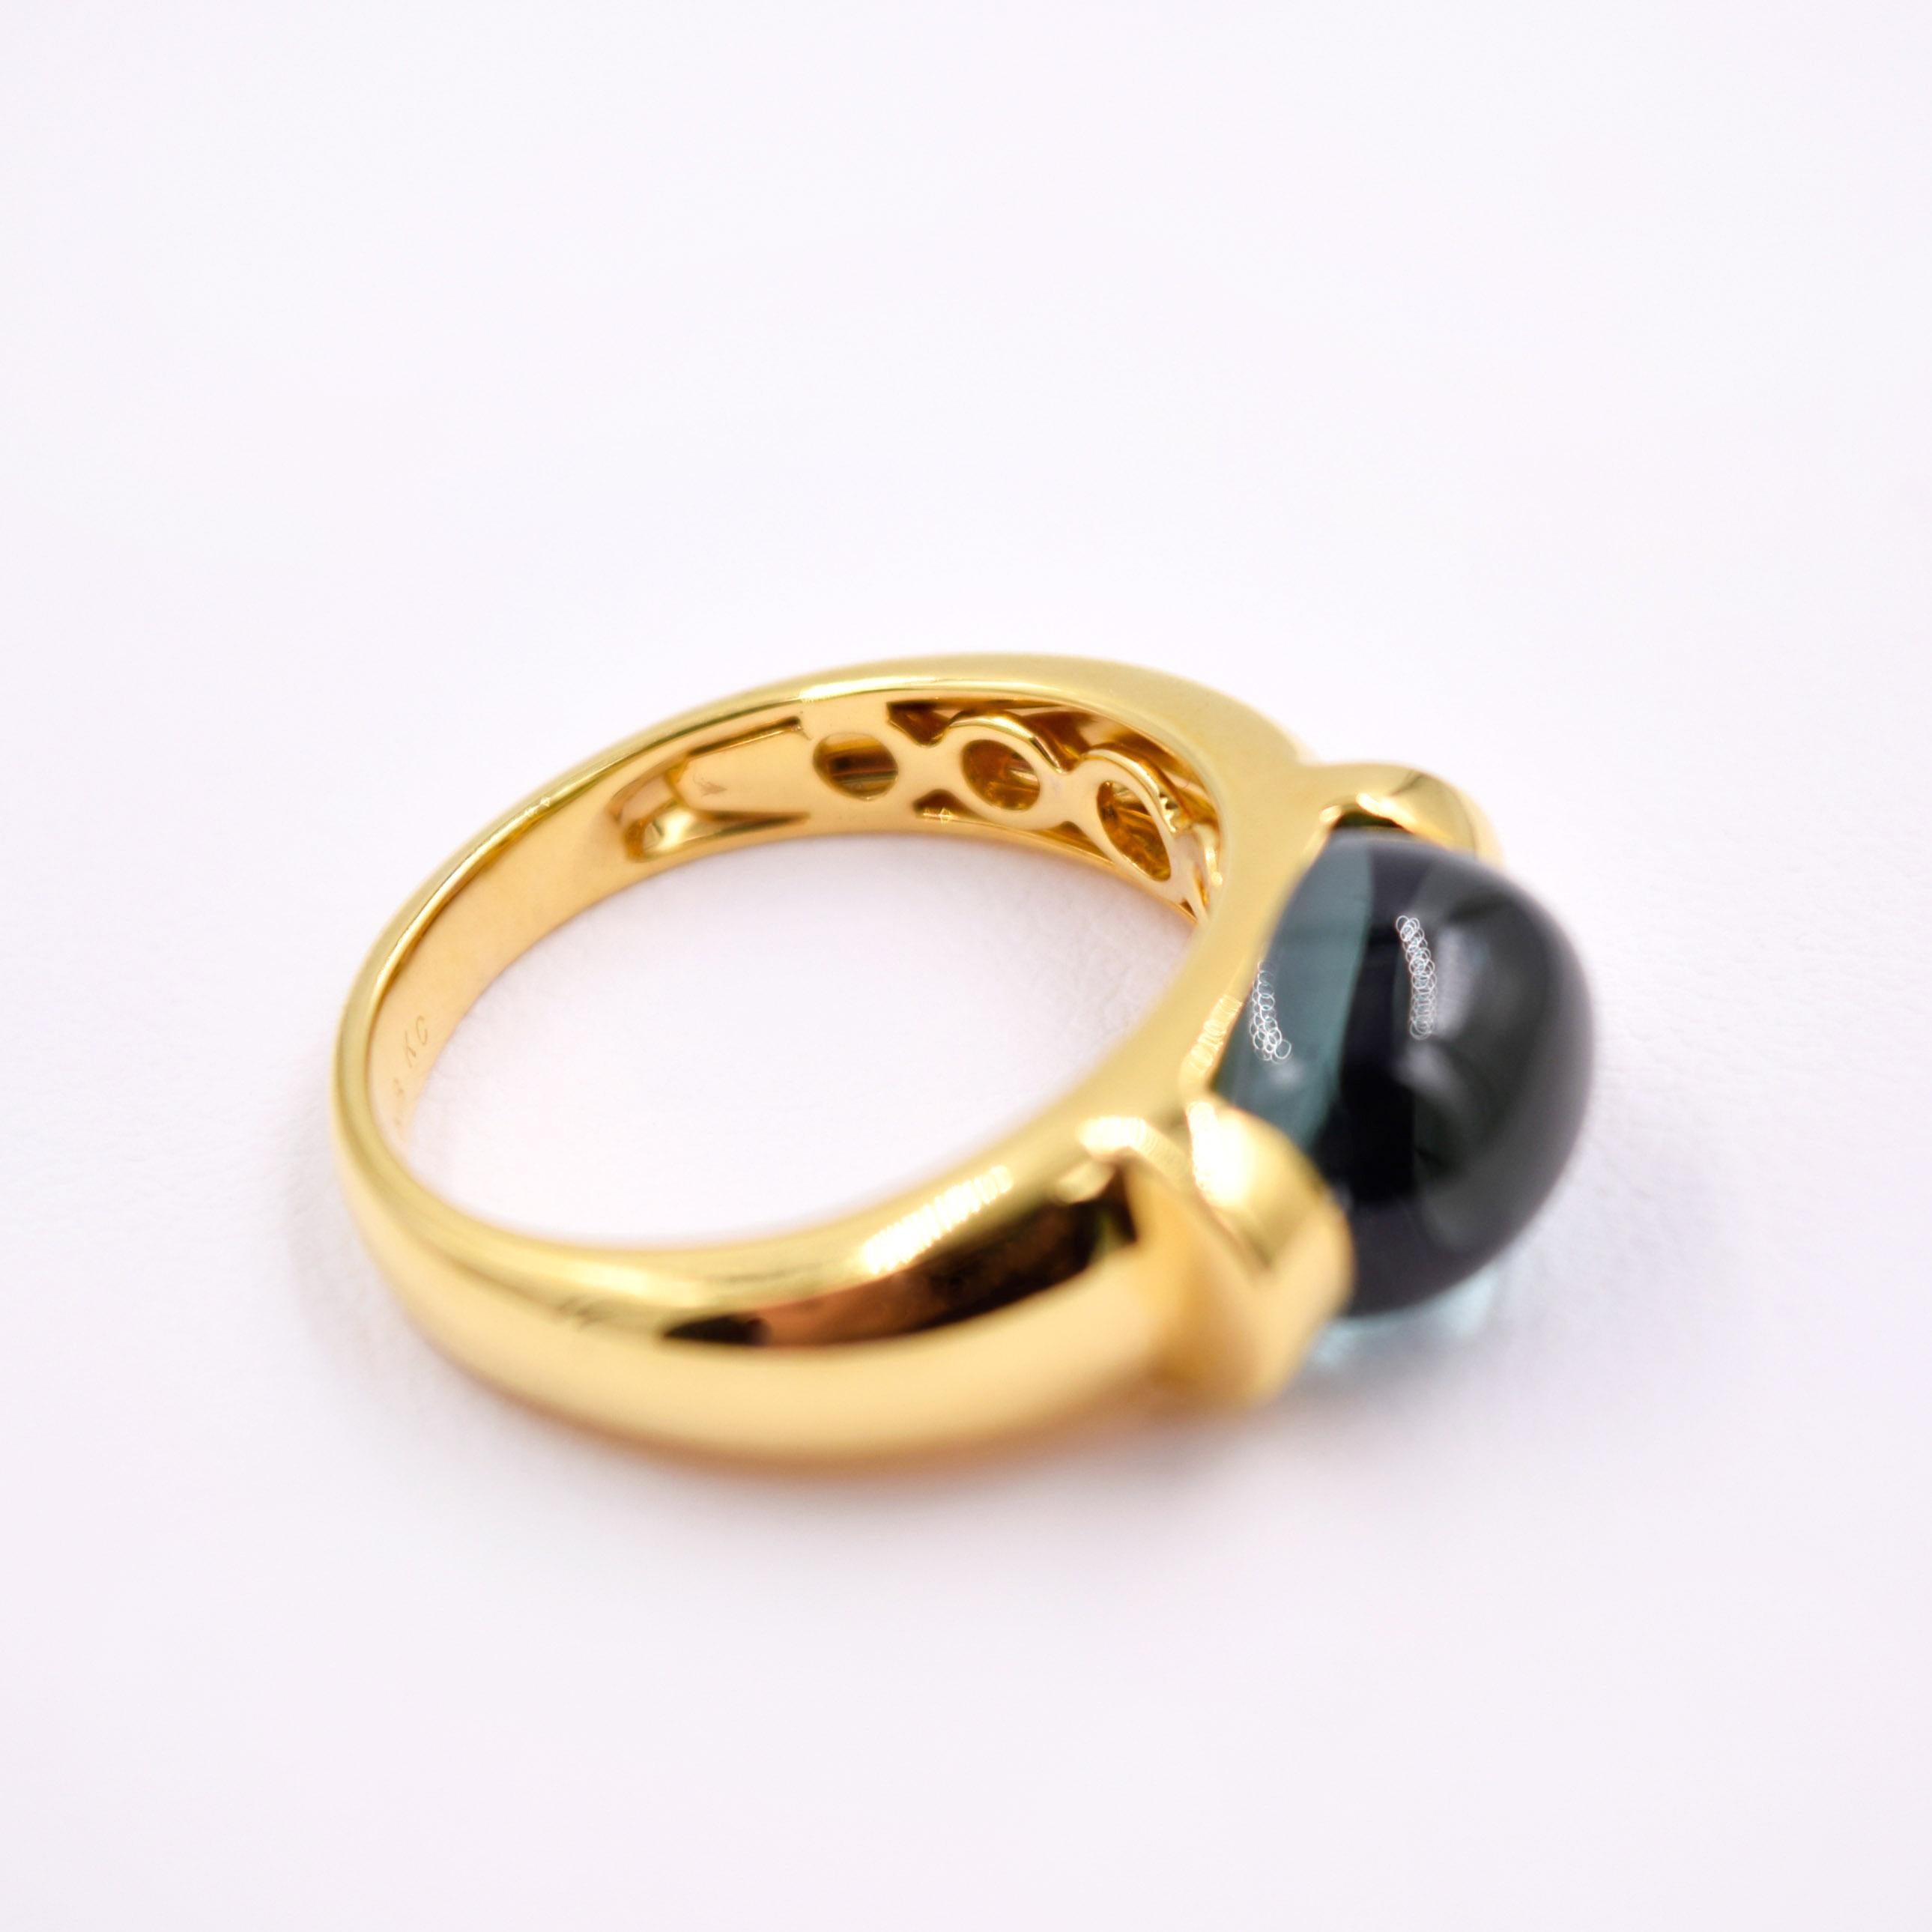 Green Cabochon Tourmaline 18 Karat Yellow Gold Ring In New Condition For Sale In Mill Valley, CA